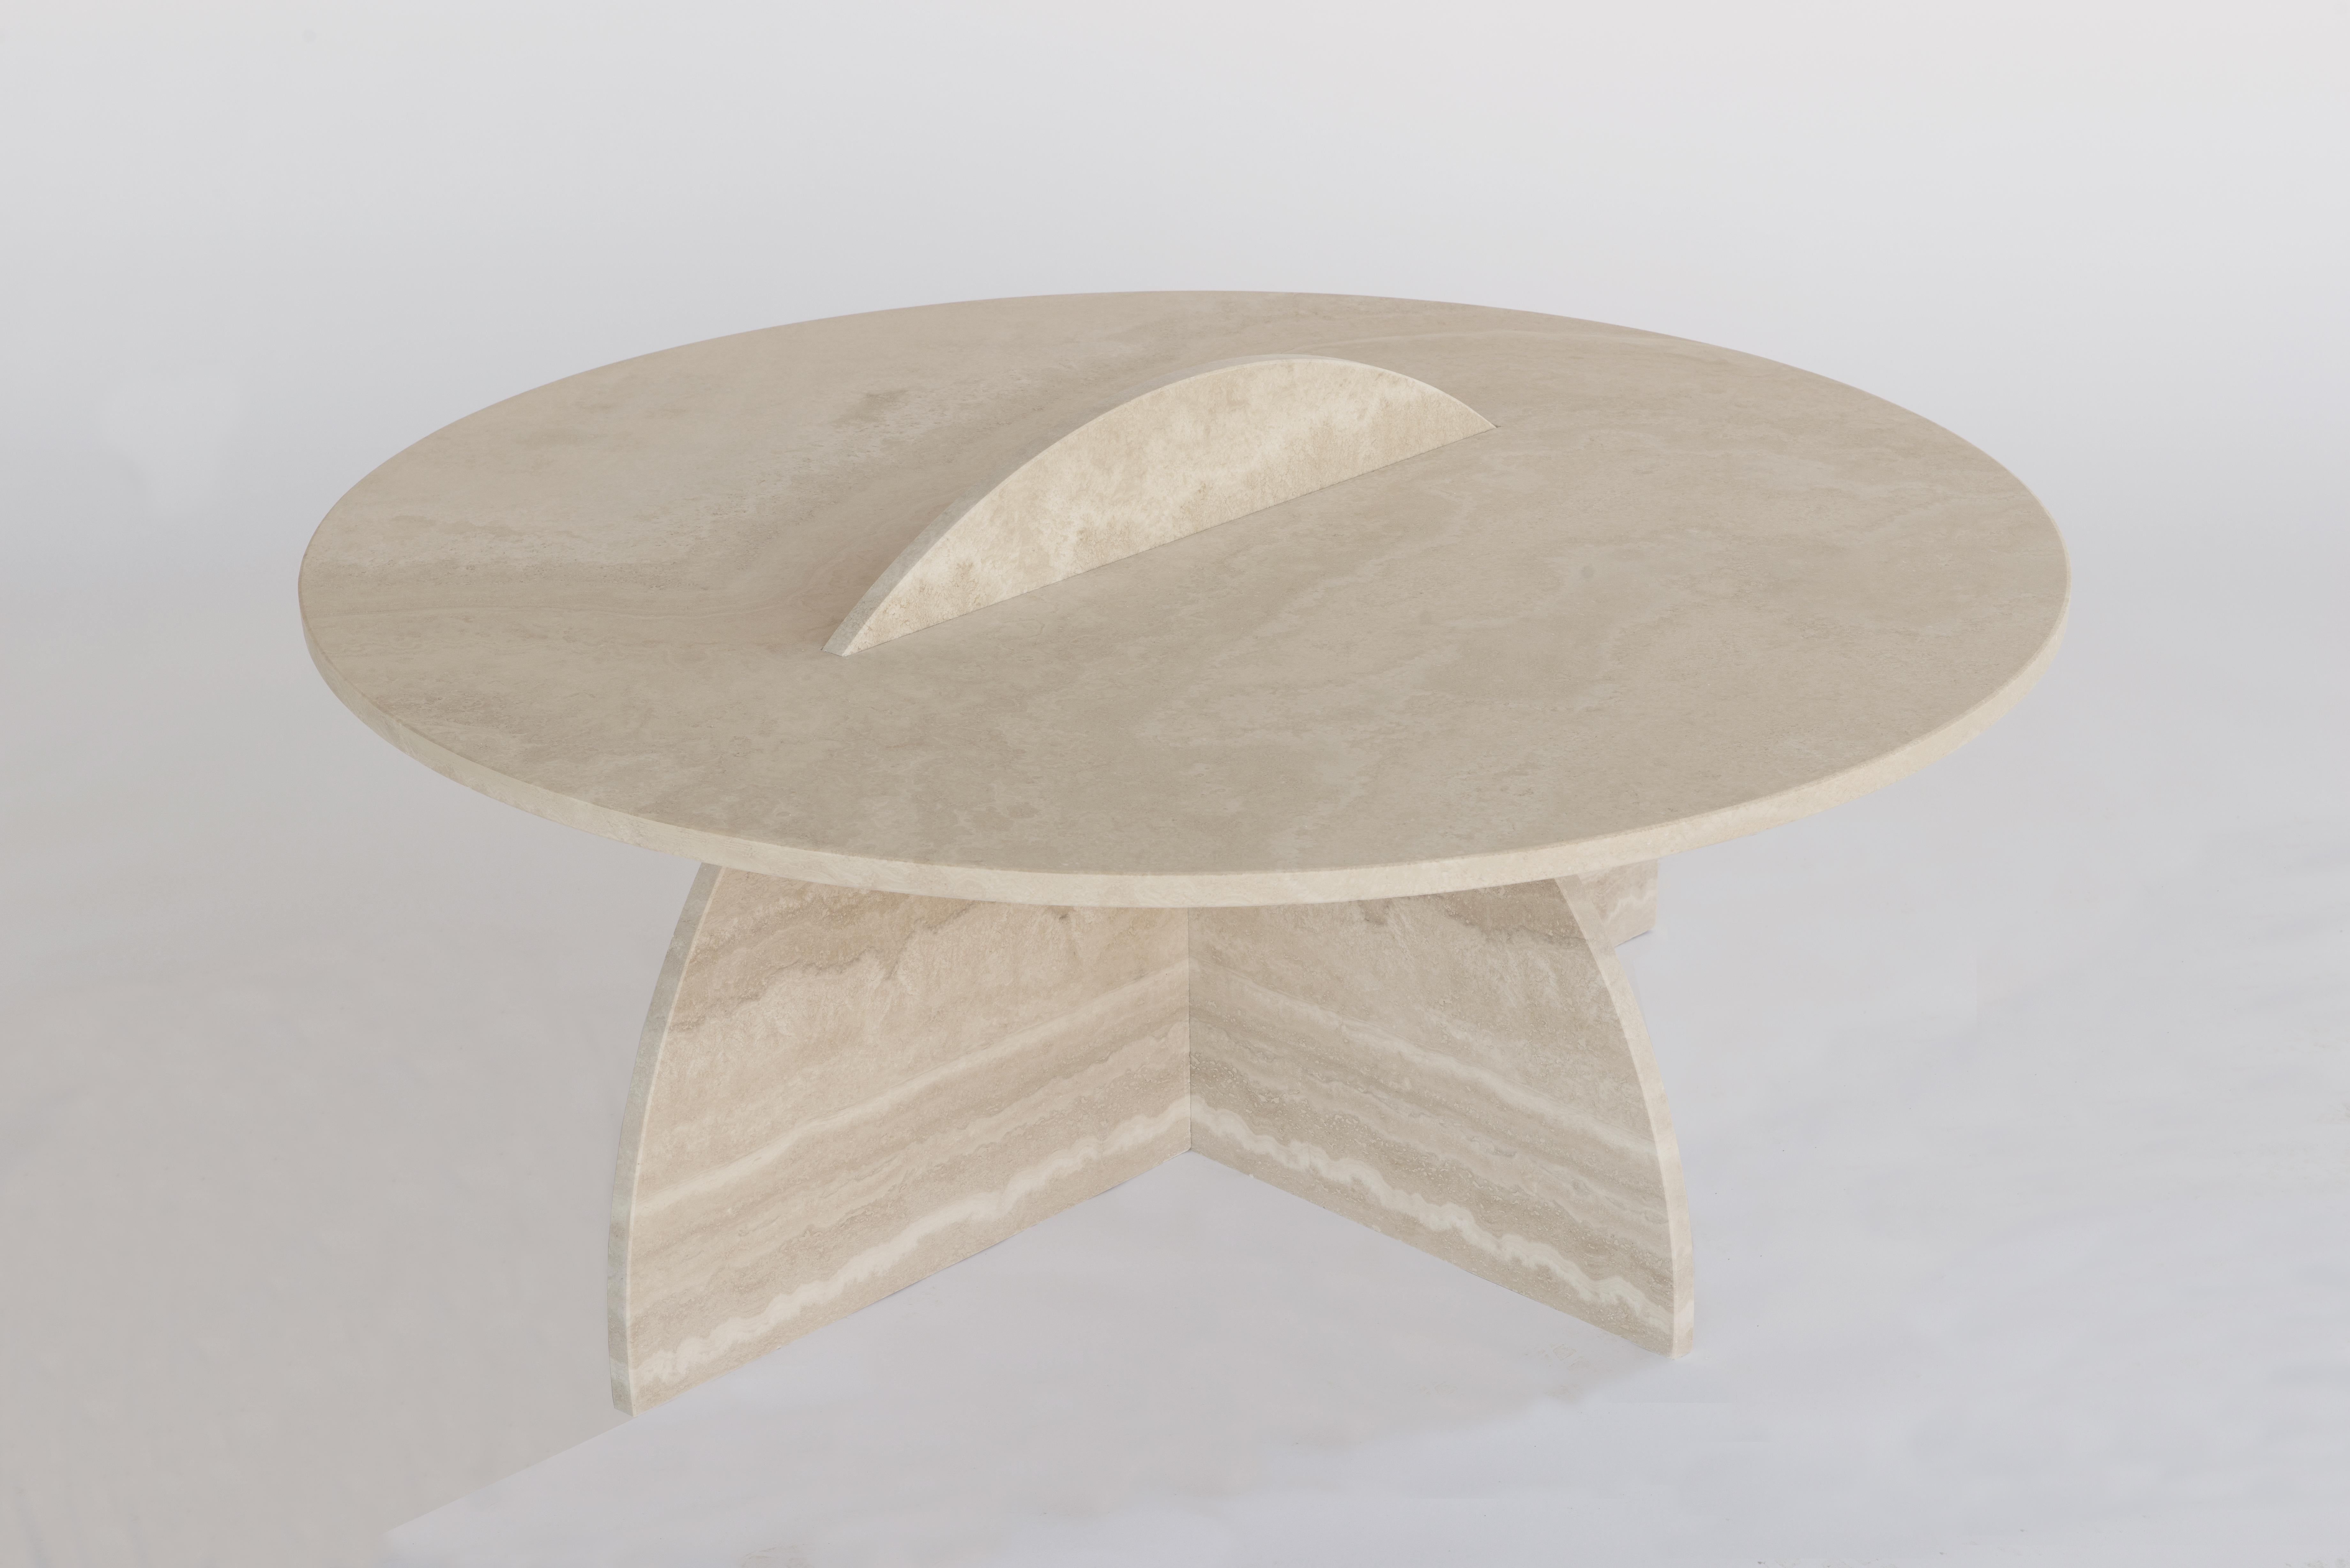 Small Roma coffee table by Emanuela Petrucci.
Dimensions: D 110 x H 40 cm.
Materials: Travertine interlocking pieces.
Finishes: brushed, filled with cement.

Roma is a coffee table designed by Architect Emanuela Petrucci to celebrate the city